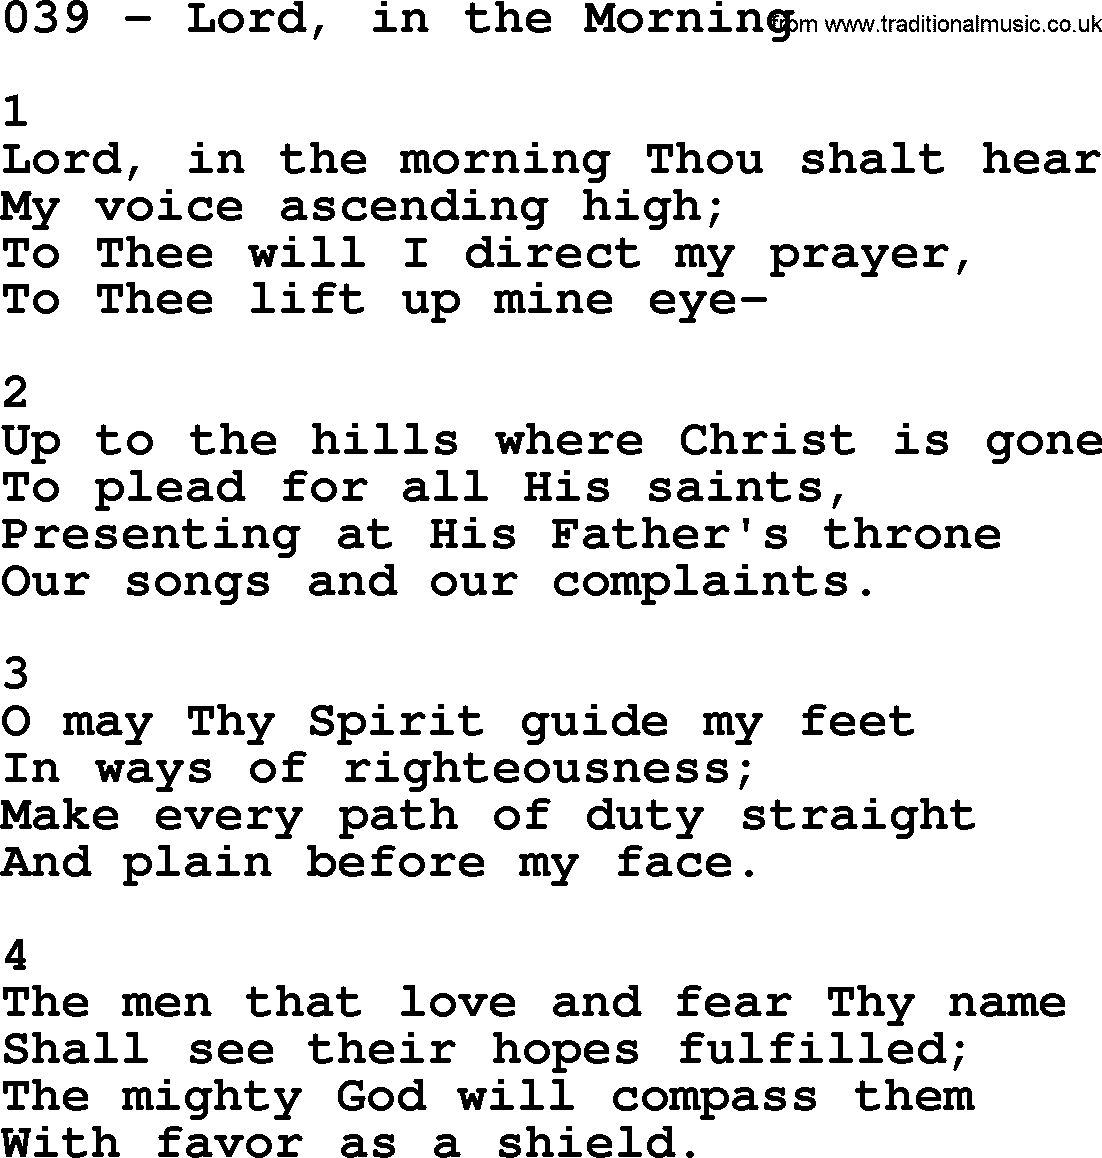 Complete Adventis Hymnal, title: 039-Lord, In The Morning, with lyrics, midi, mp3, powerpoints(PPT) and PDF,